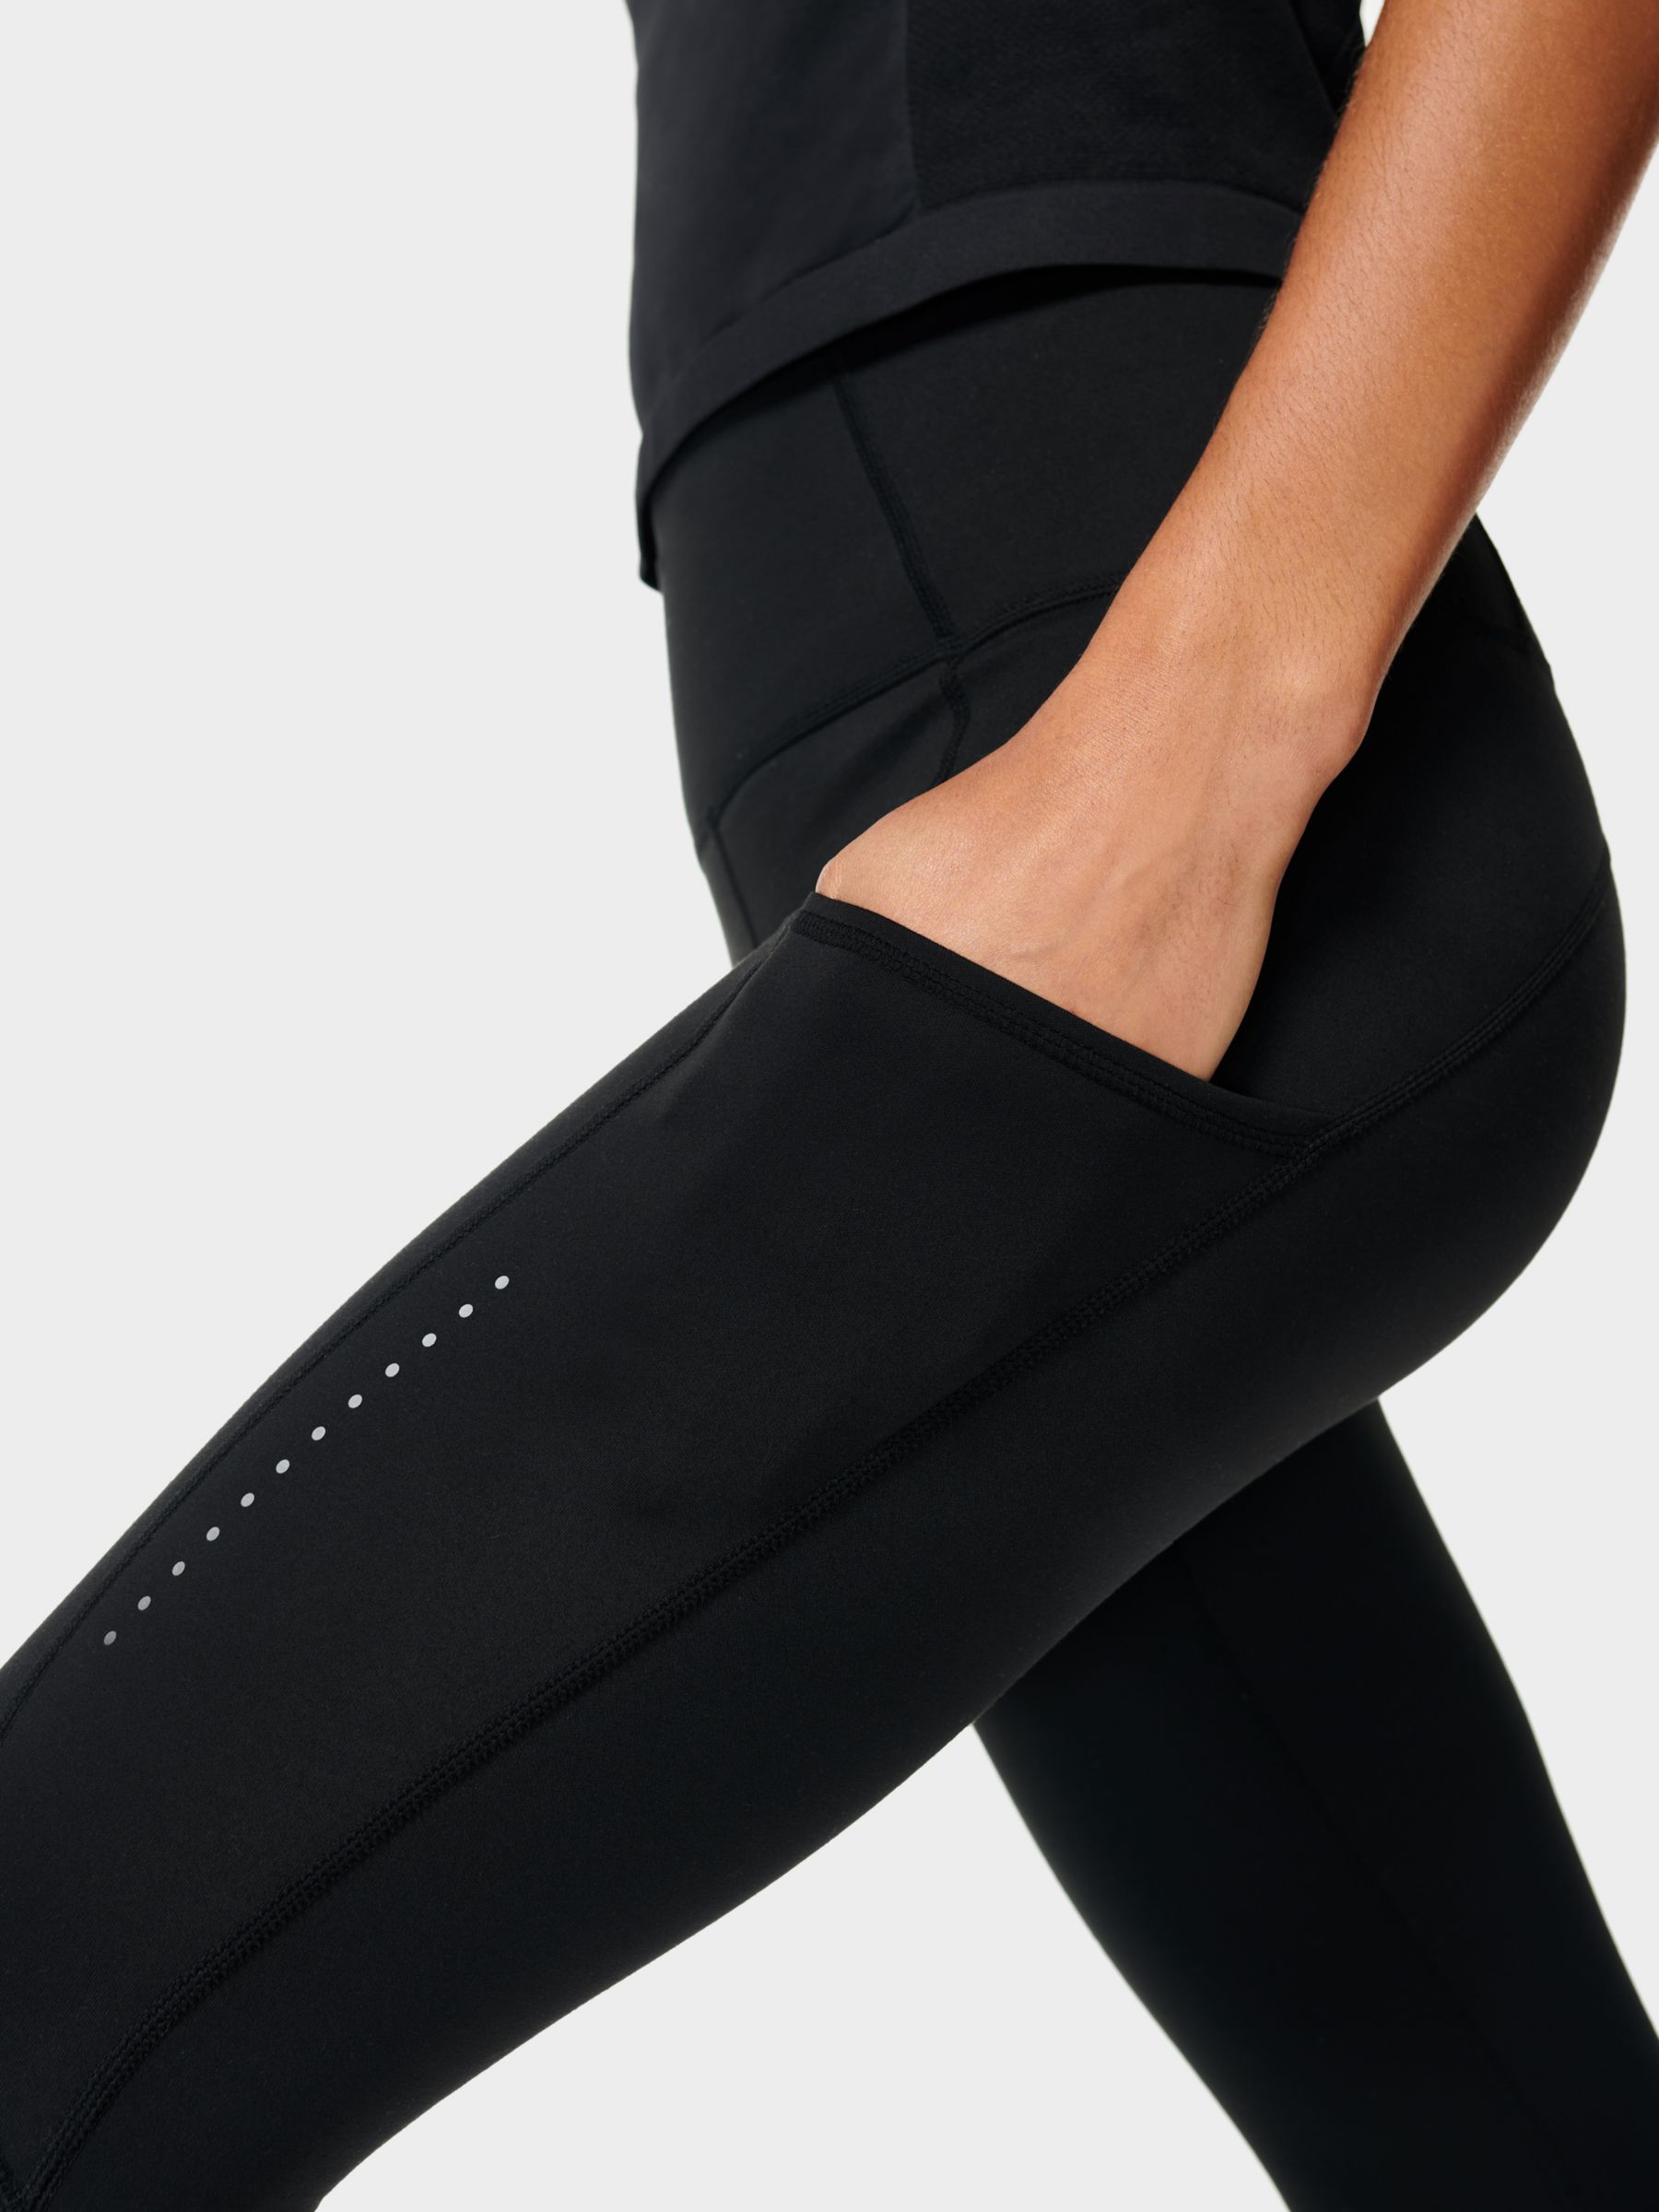 Therma Boost Stretch Running Leggings